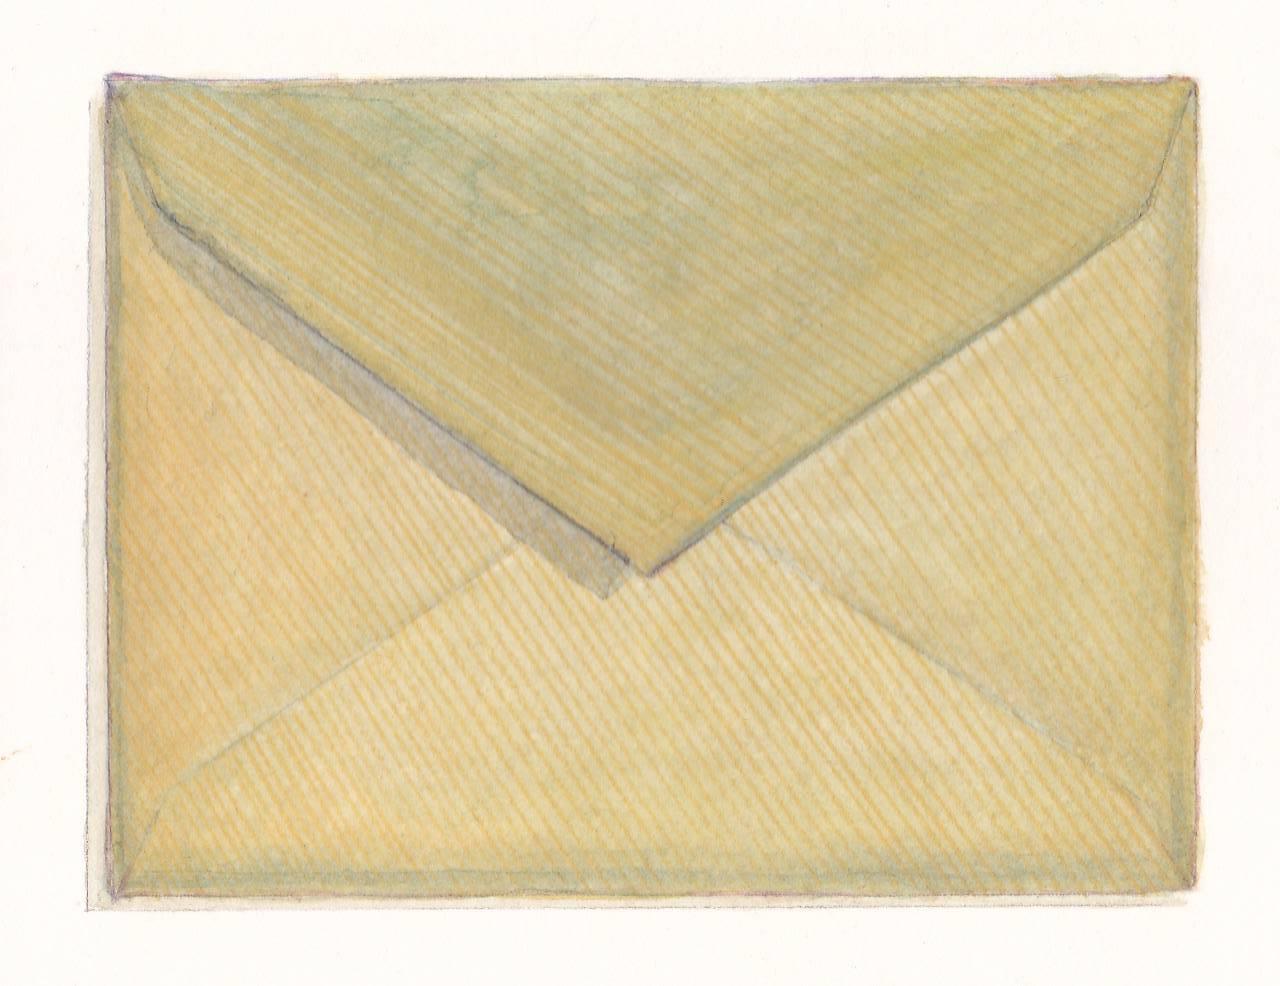 Margot Glass explores the fragility of communication, and people’s natural drive to find narrative in even the most ordinary of objects. In her Envelopes series, Glass works in watercolor, pencil and silverpoint, using trompe l’oeil to highlight the